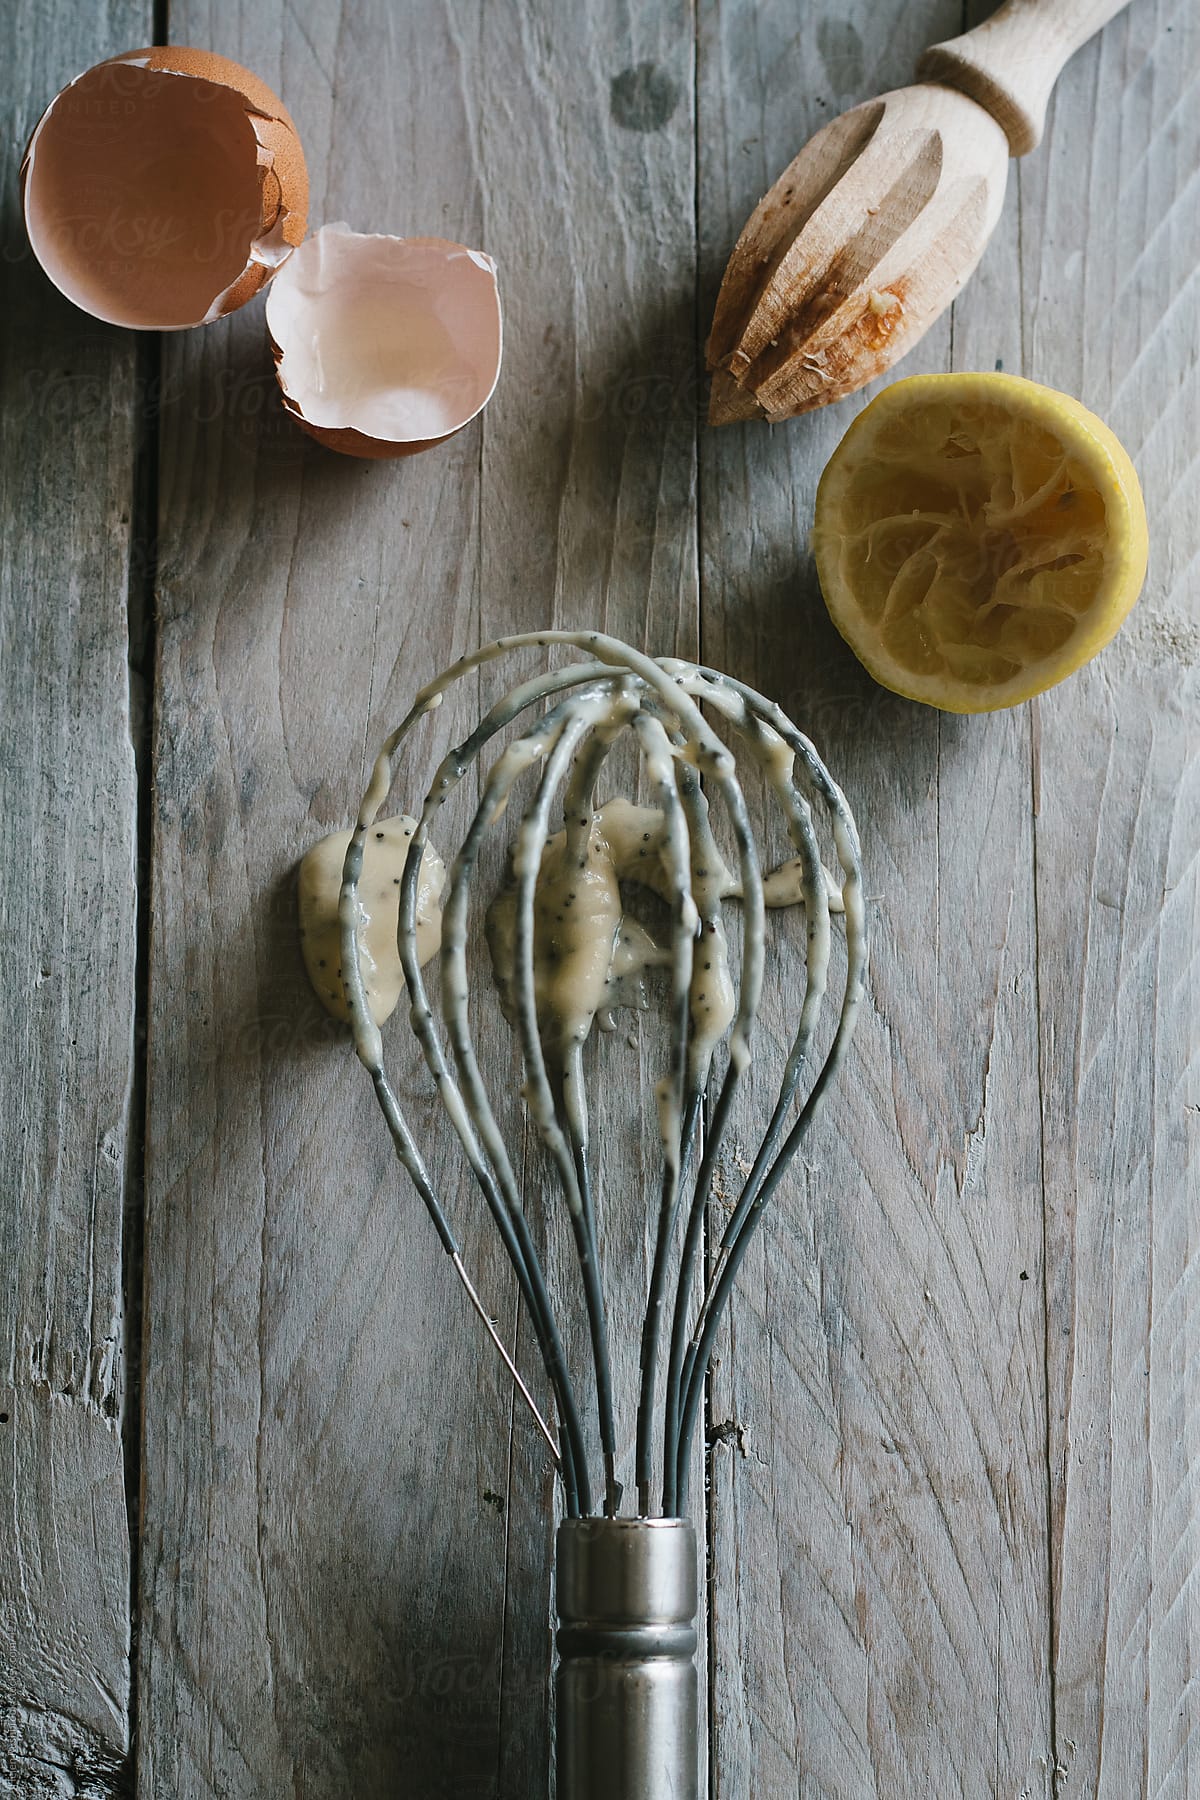 Eggs shell, juiced lemon and a whisk with batter on it.